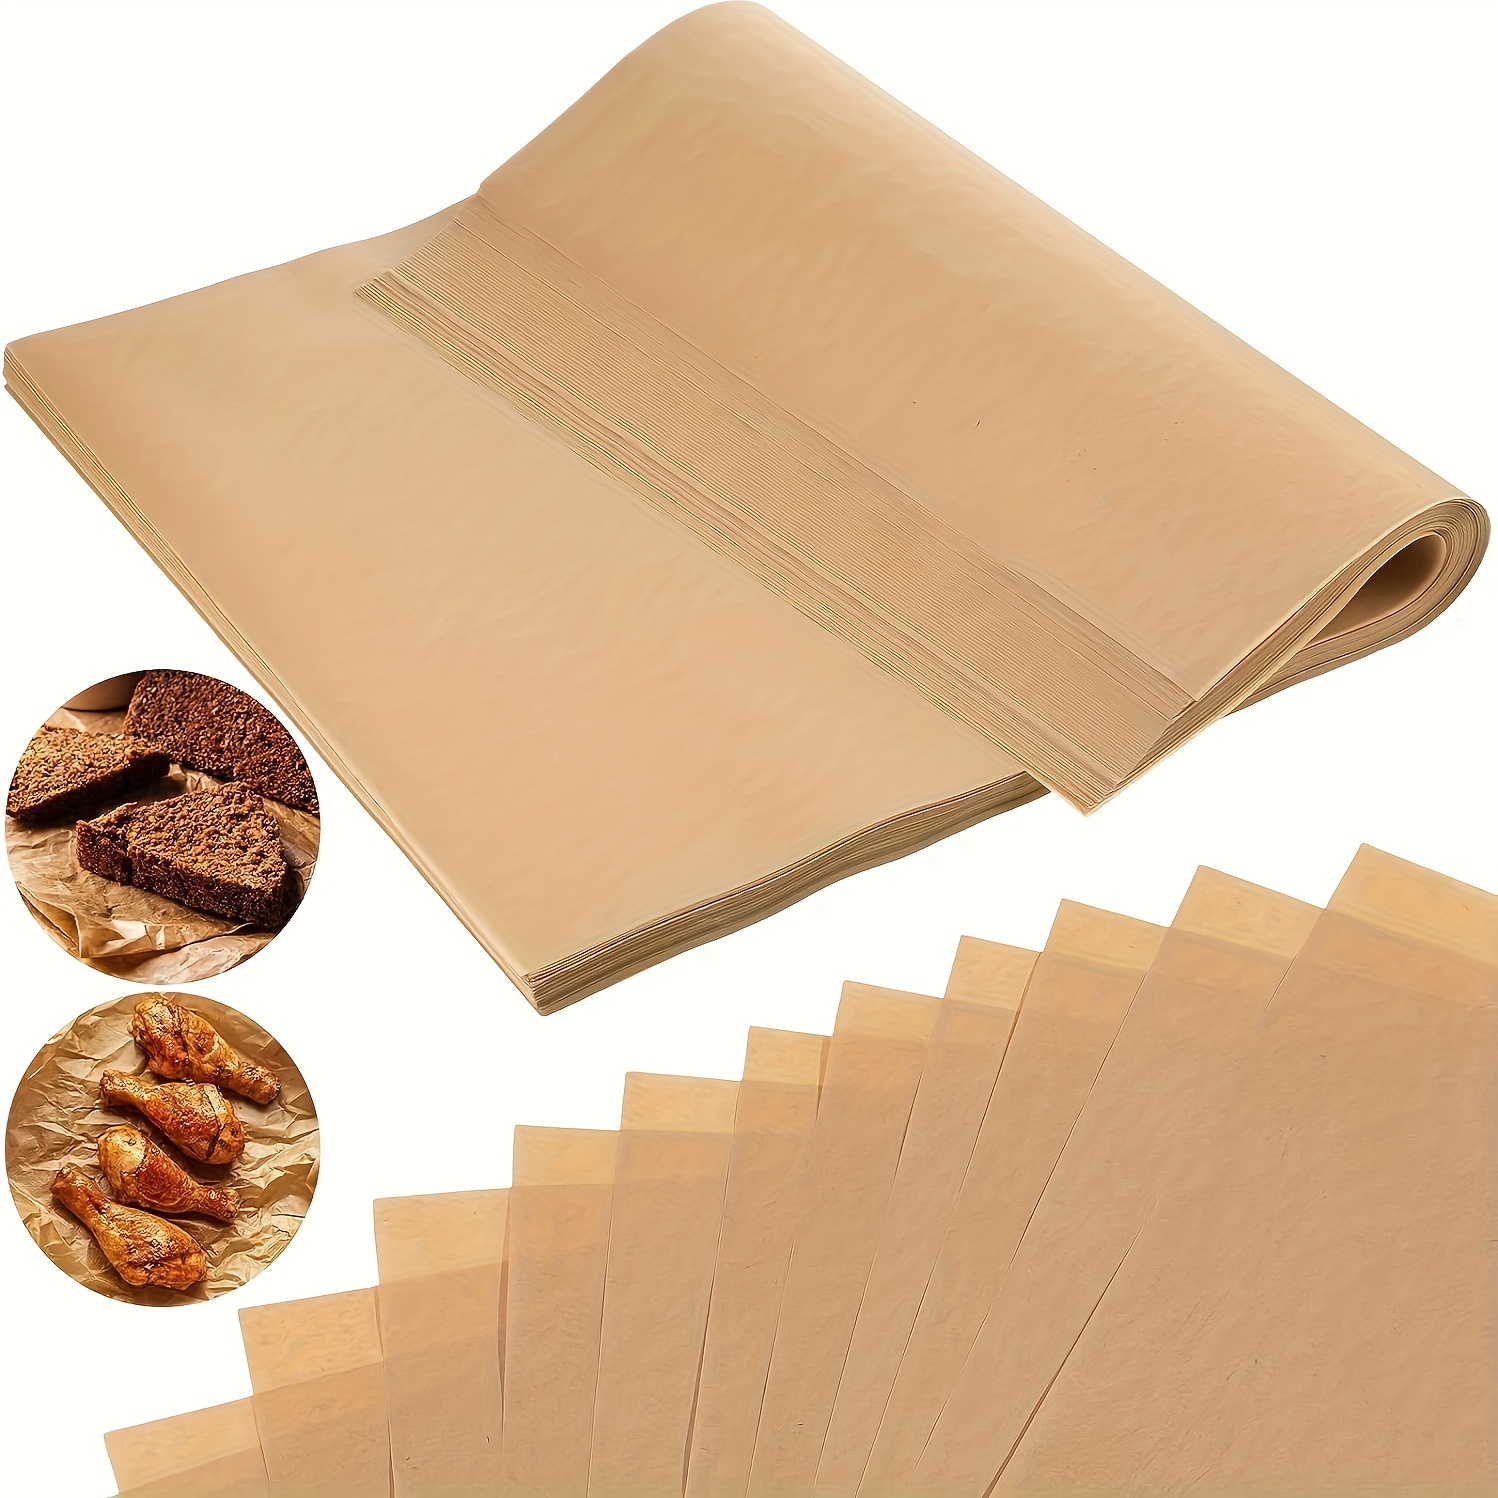 Unbleached Parchment Paper for Baking, 12 in x 315 in, Baking Paper, Non-Stick Parchment Paper Roll for Baking, Cooking, Grilling, Air Fryer and